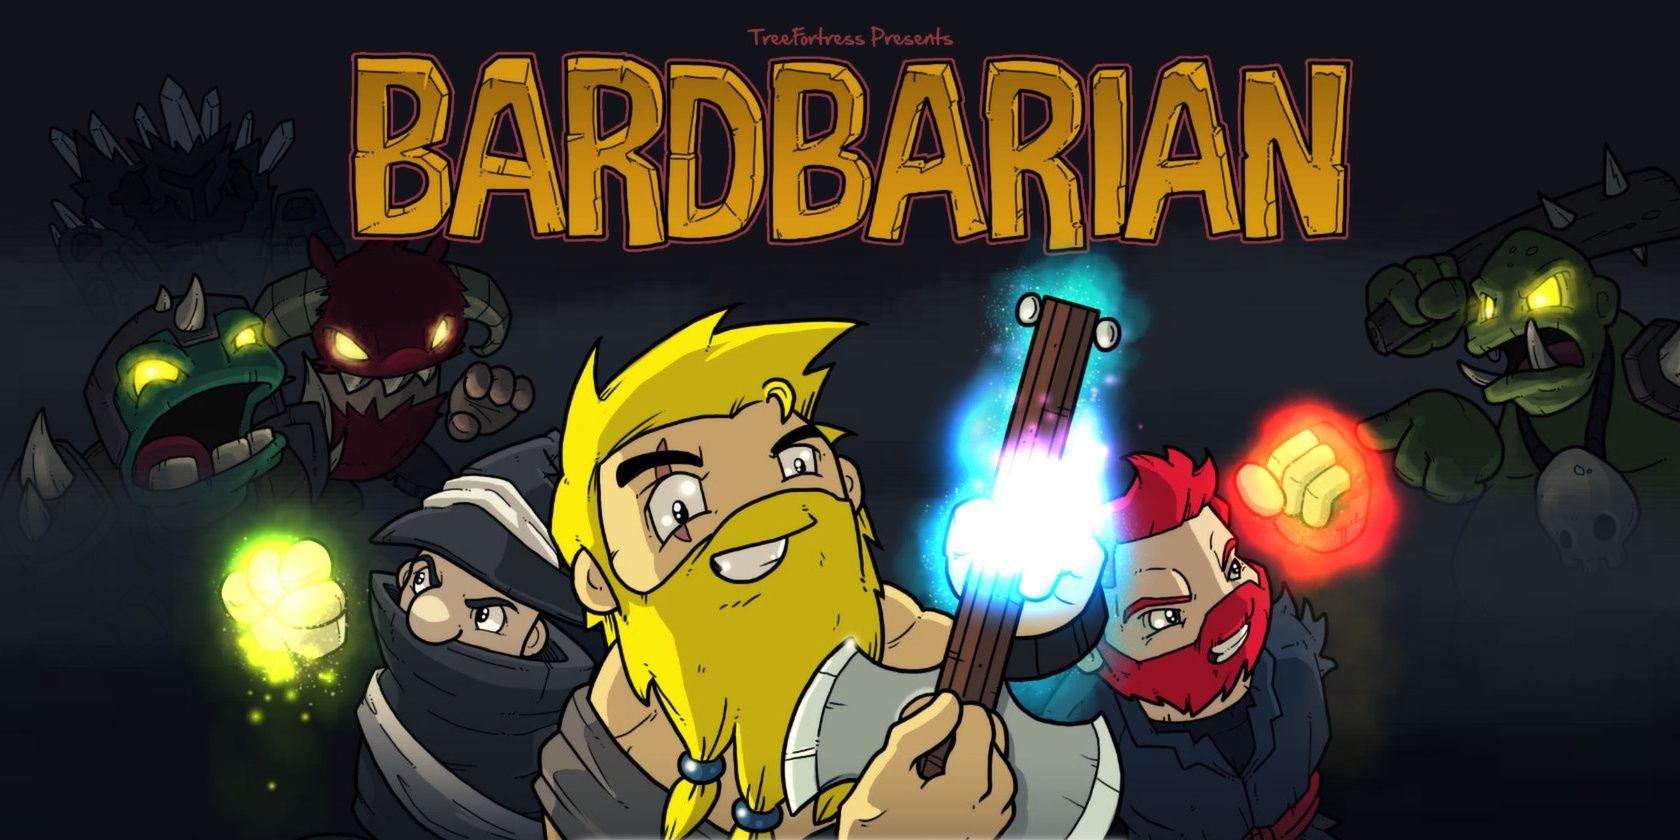 Key art of a barbarian with a guitar axe